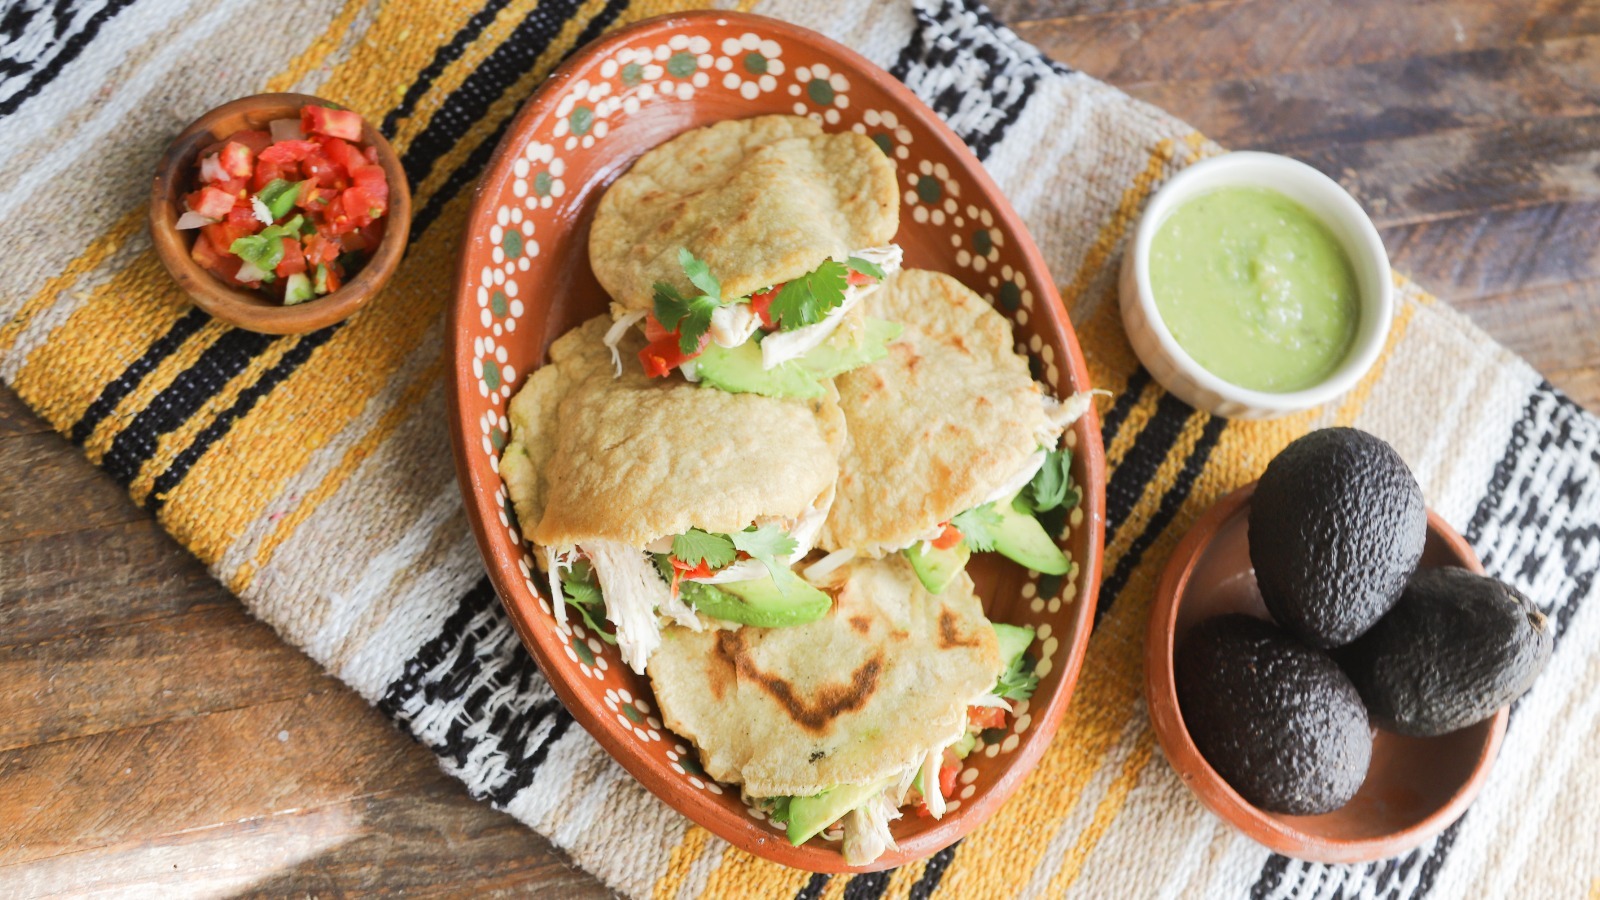 Traditional Mexican Stuffed Gorditas Recipe - Tasting Table - News Digging